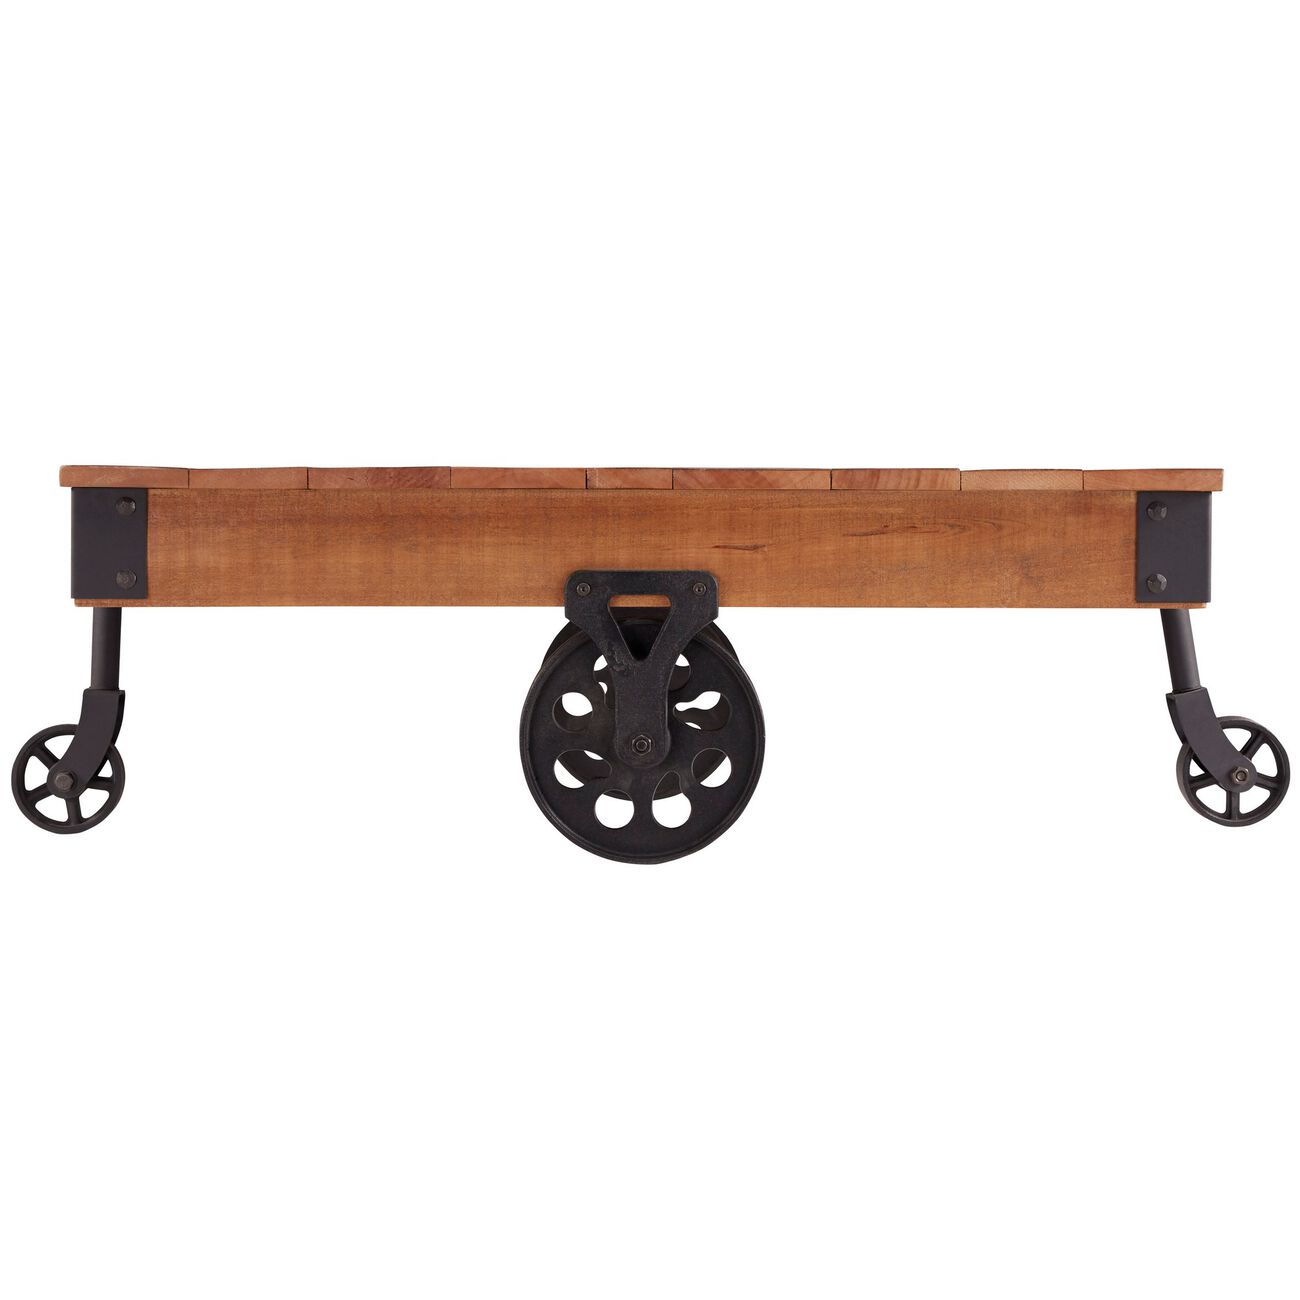 Plank Style Wooden Cocktail Table with Casters, Brown and Black